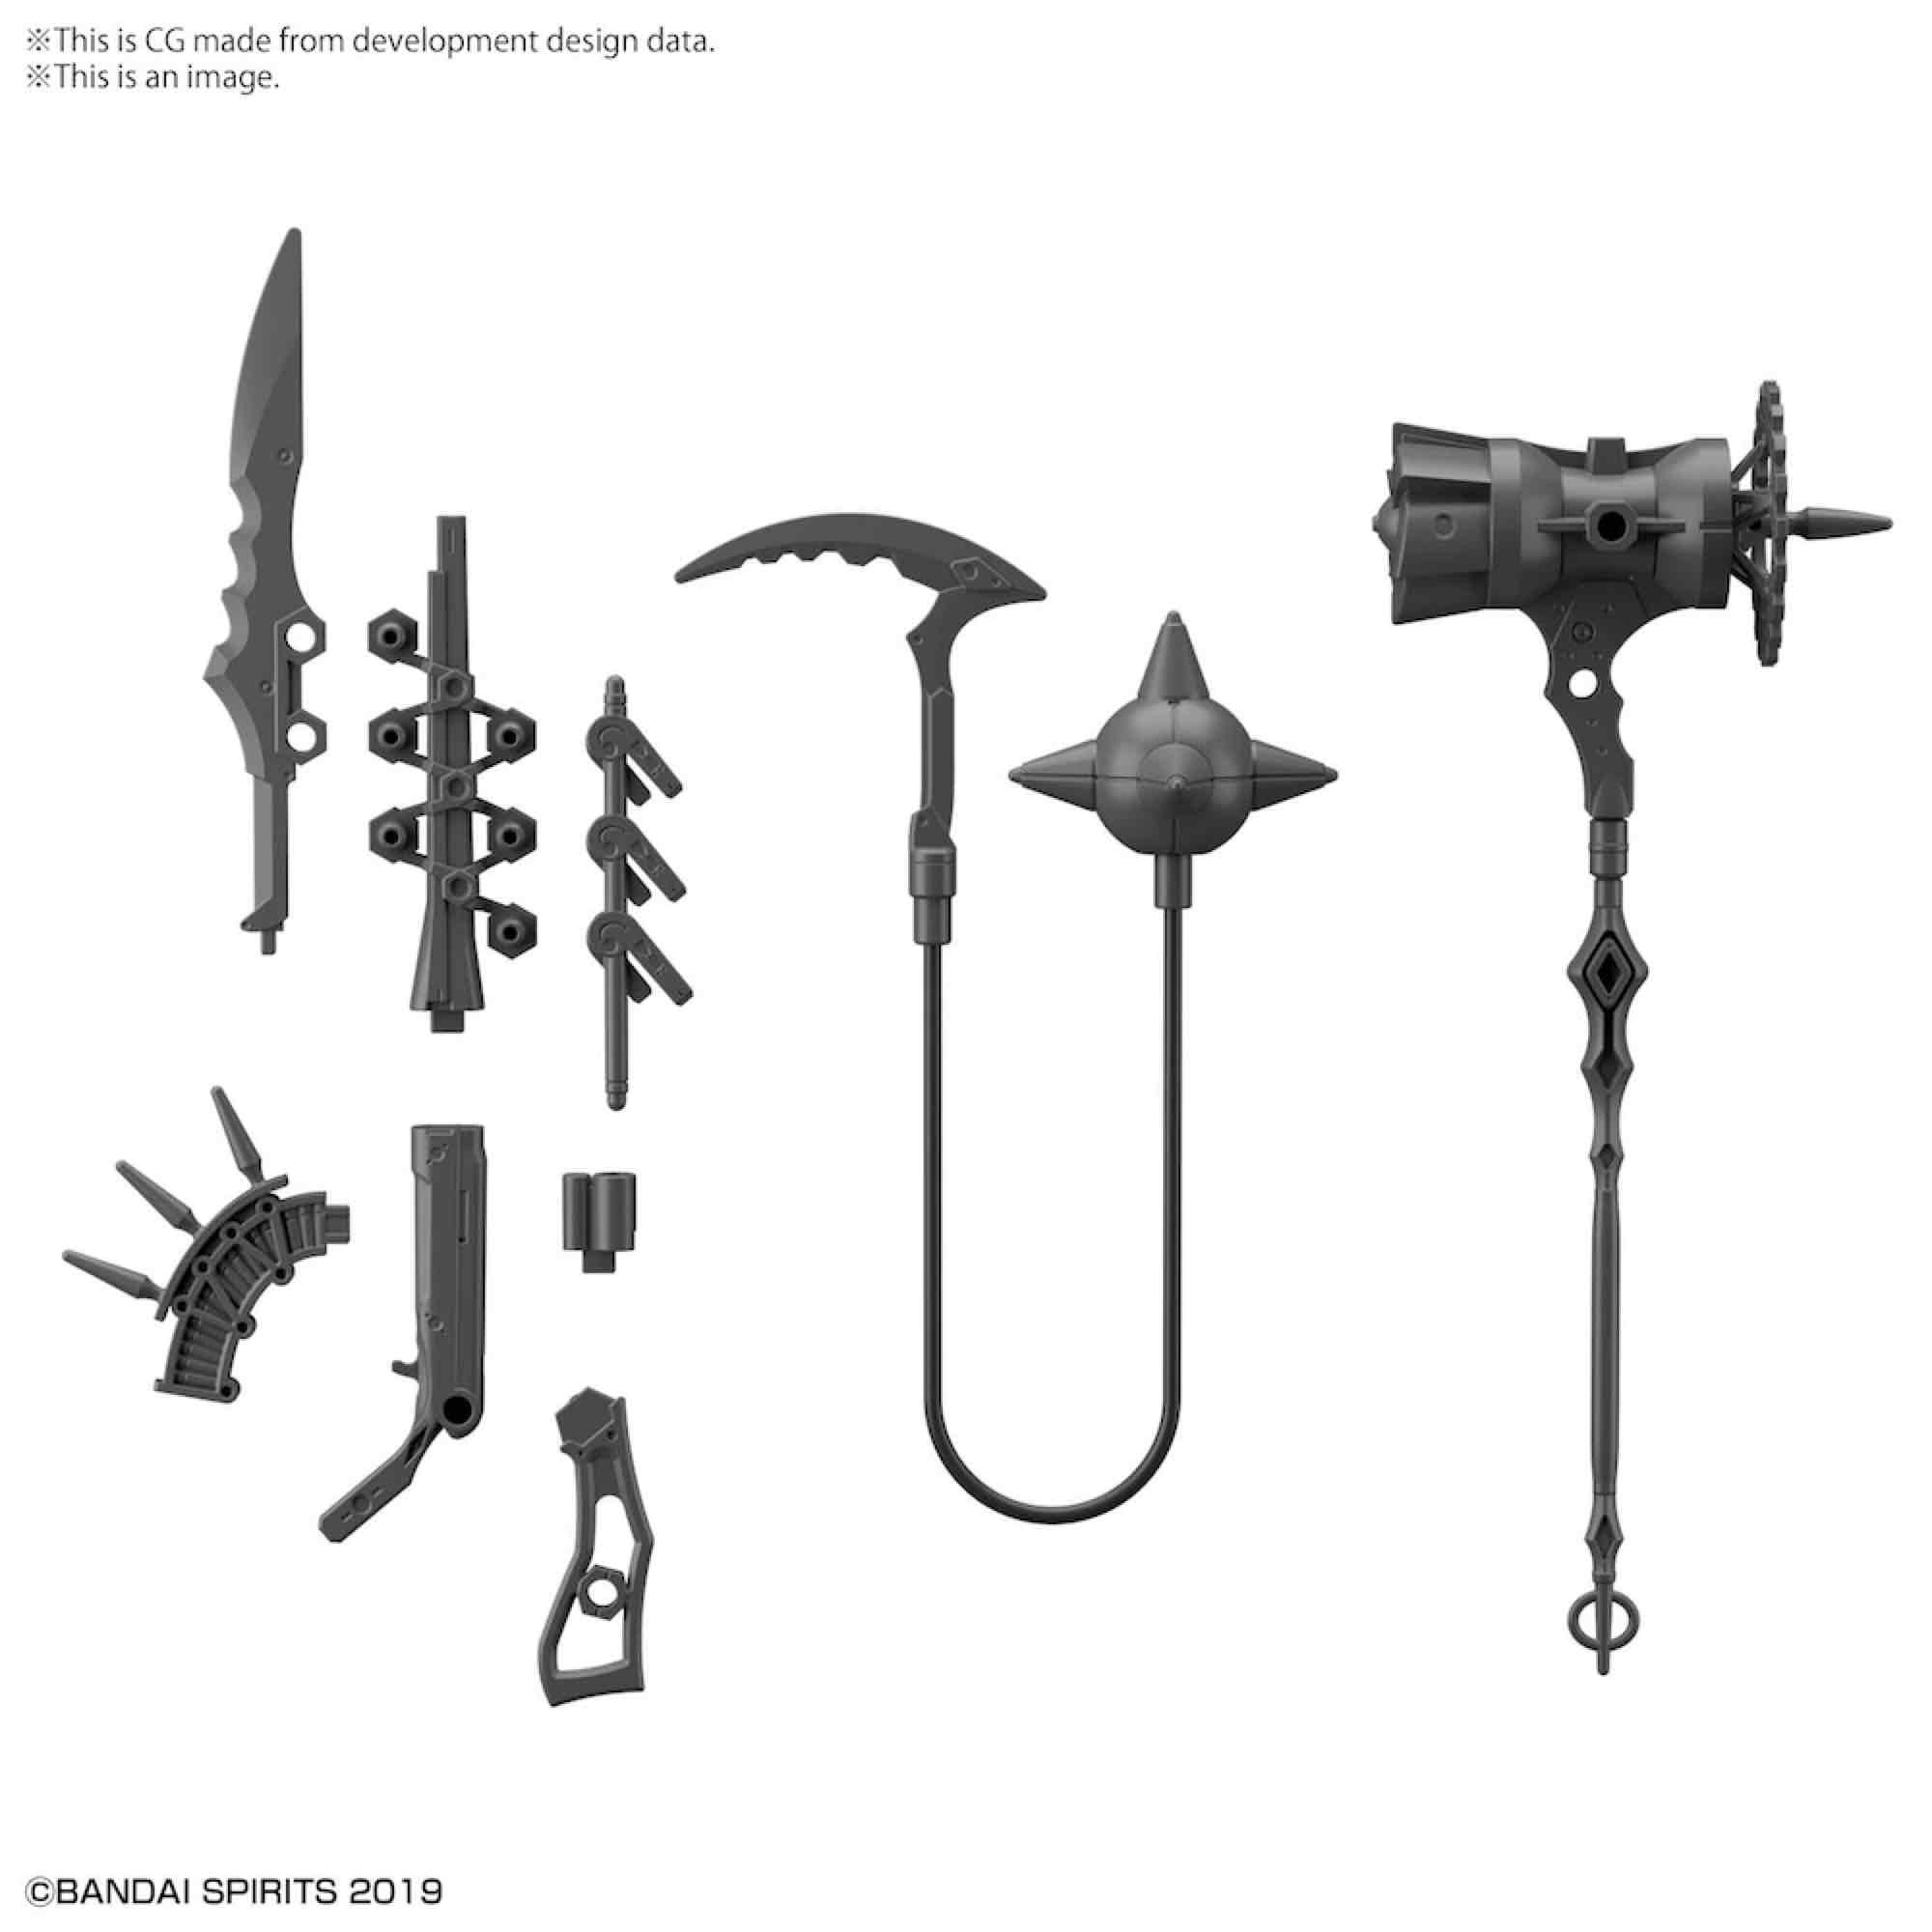 CUSTOMIZE WEAPONS (FANTASY WEAPON)